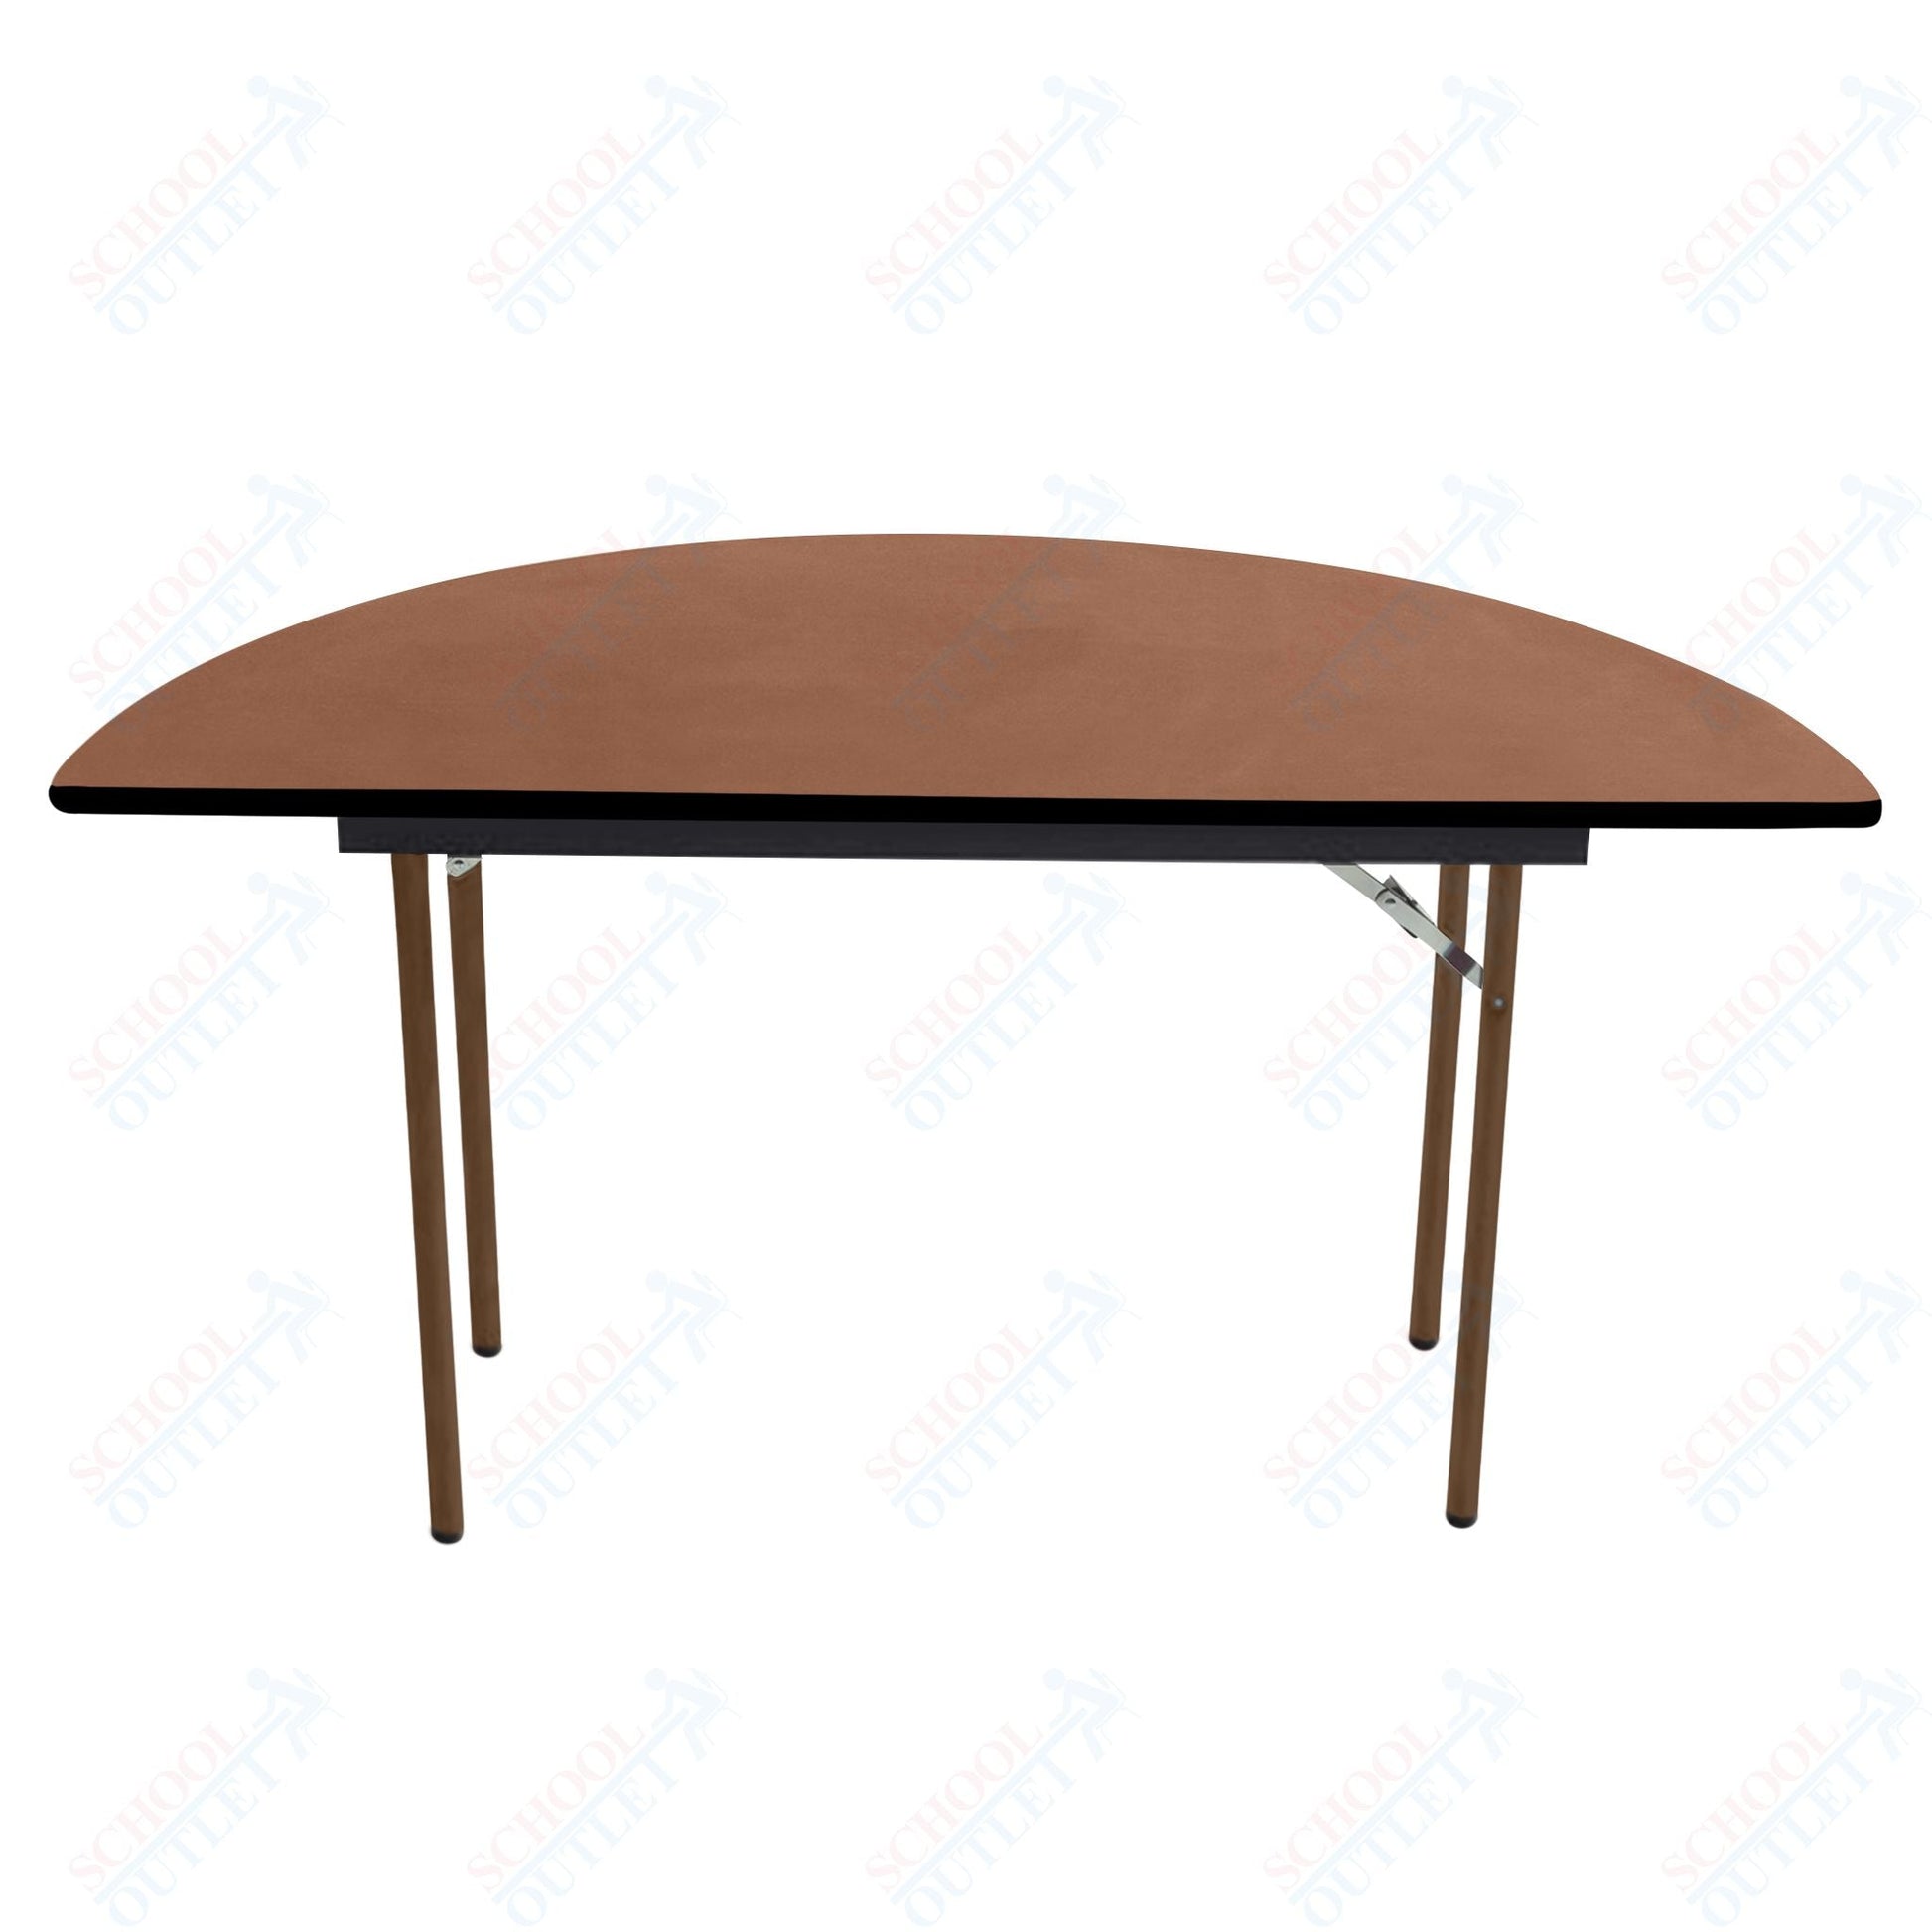 AmTab Folding Table - Plywood Stained and Sealed - Vinyl T - Molding Edge - Half Round - Half 60" Diameter x 29"H (AmTab AMT - HR60PM) - SchoolOutlet